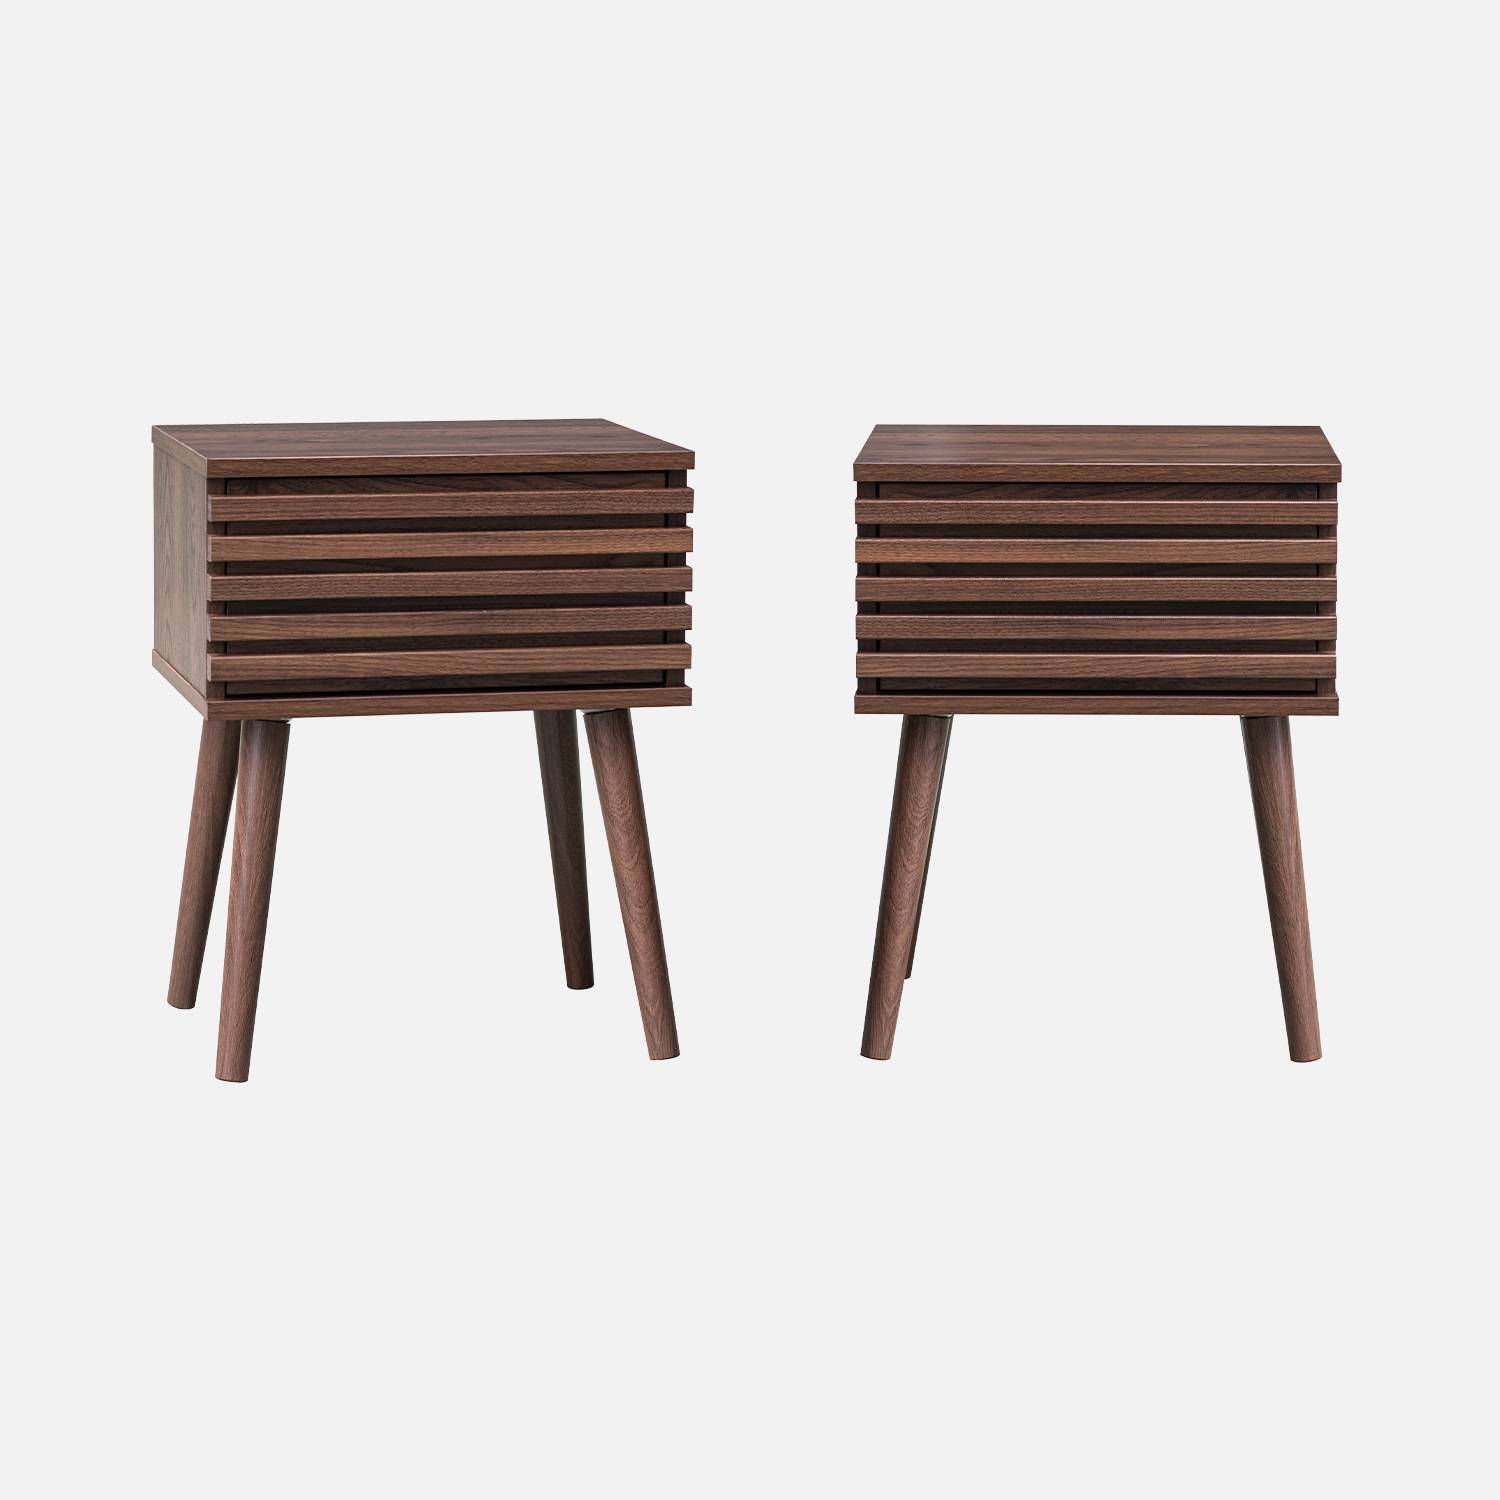 Pair of scandi-style bedside tables with grooved wood effect, Walnut